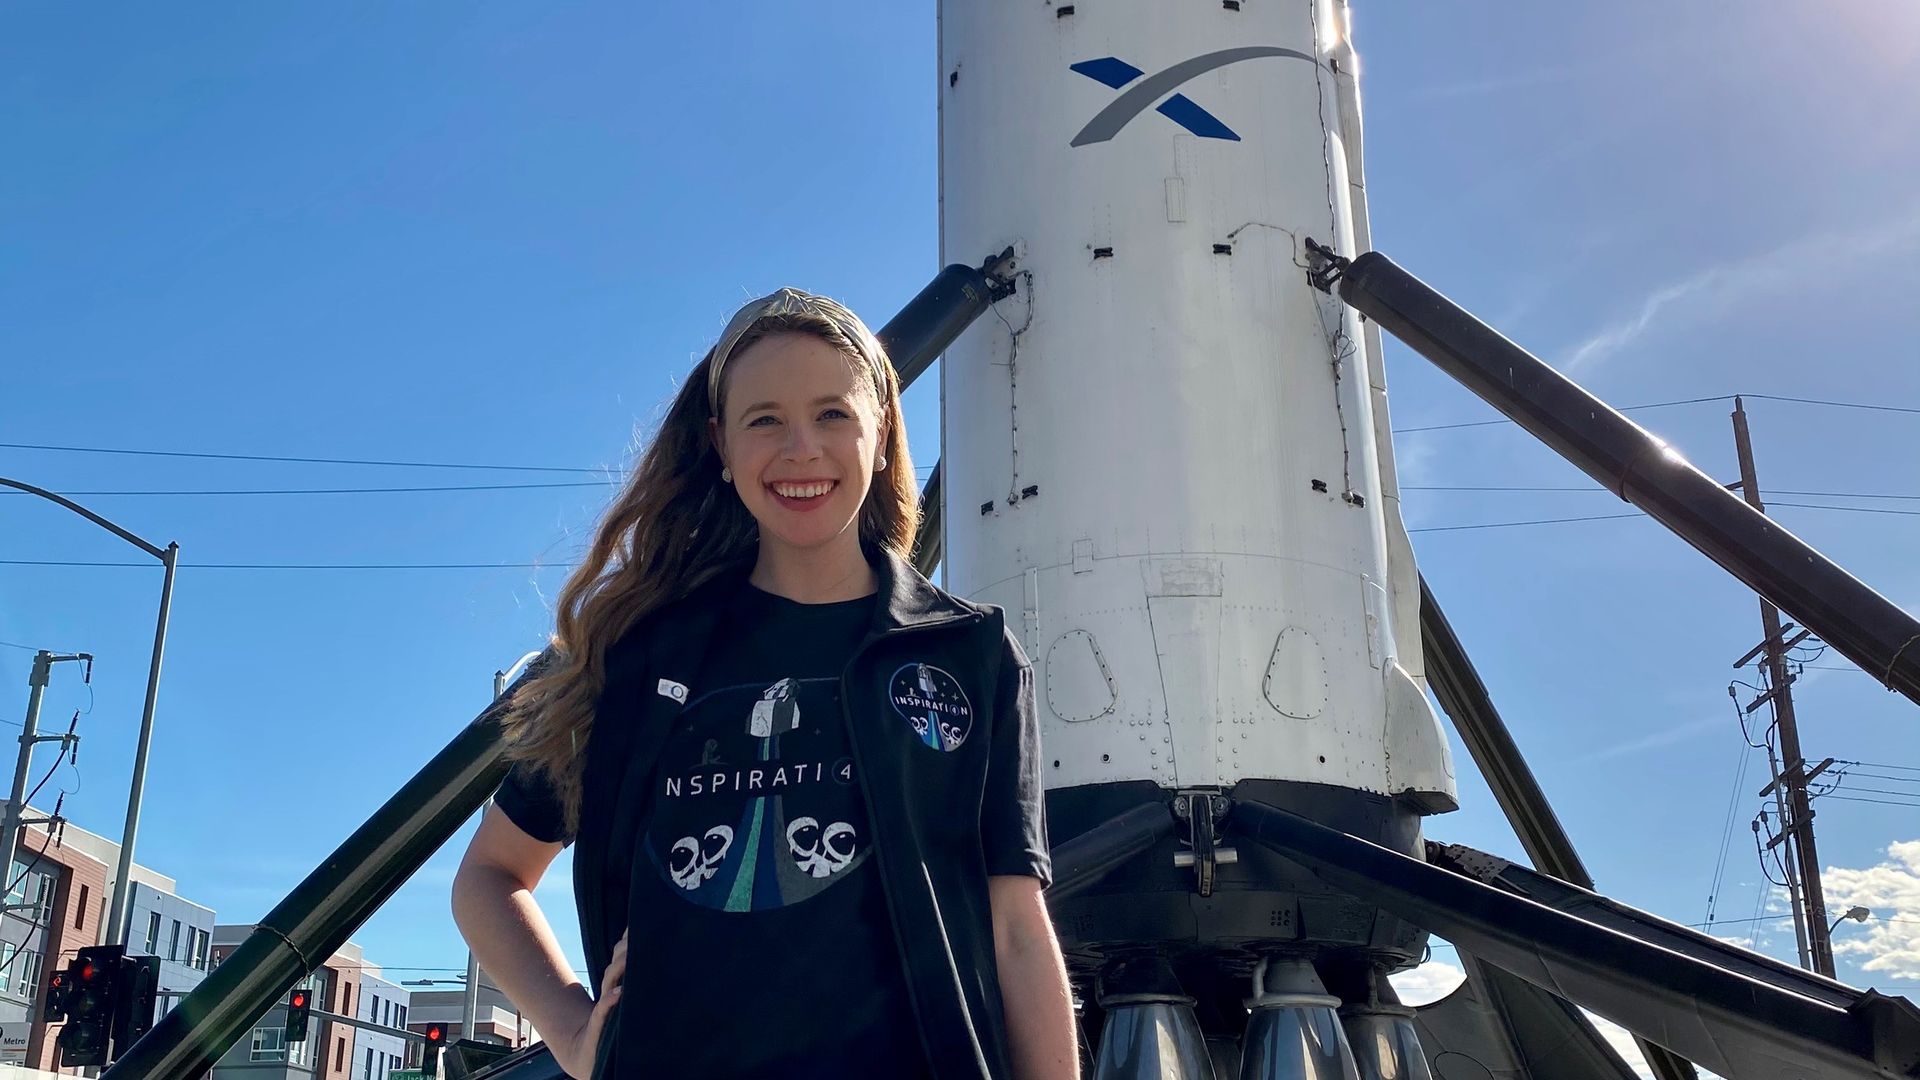 A white woman stands in front of a SpaceX rocket with her hand on her hip, smiling.